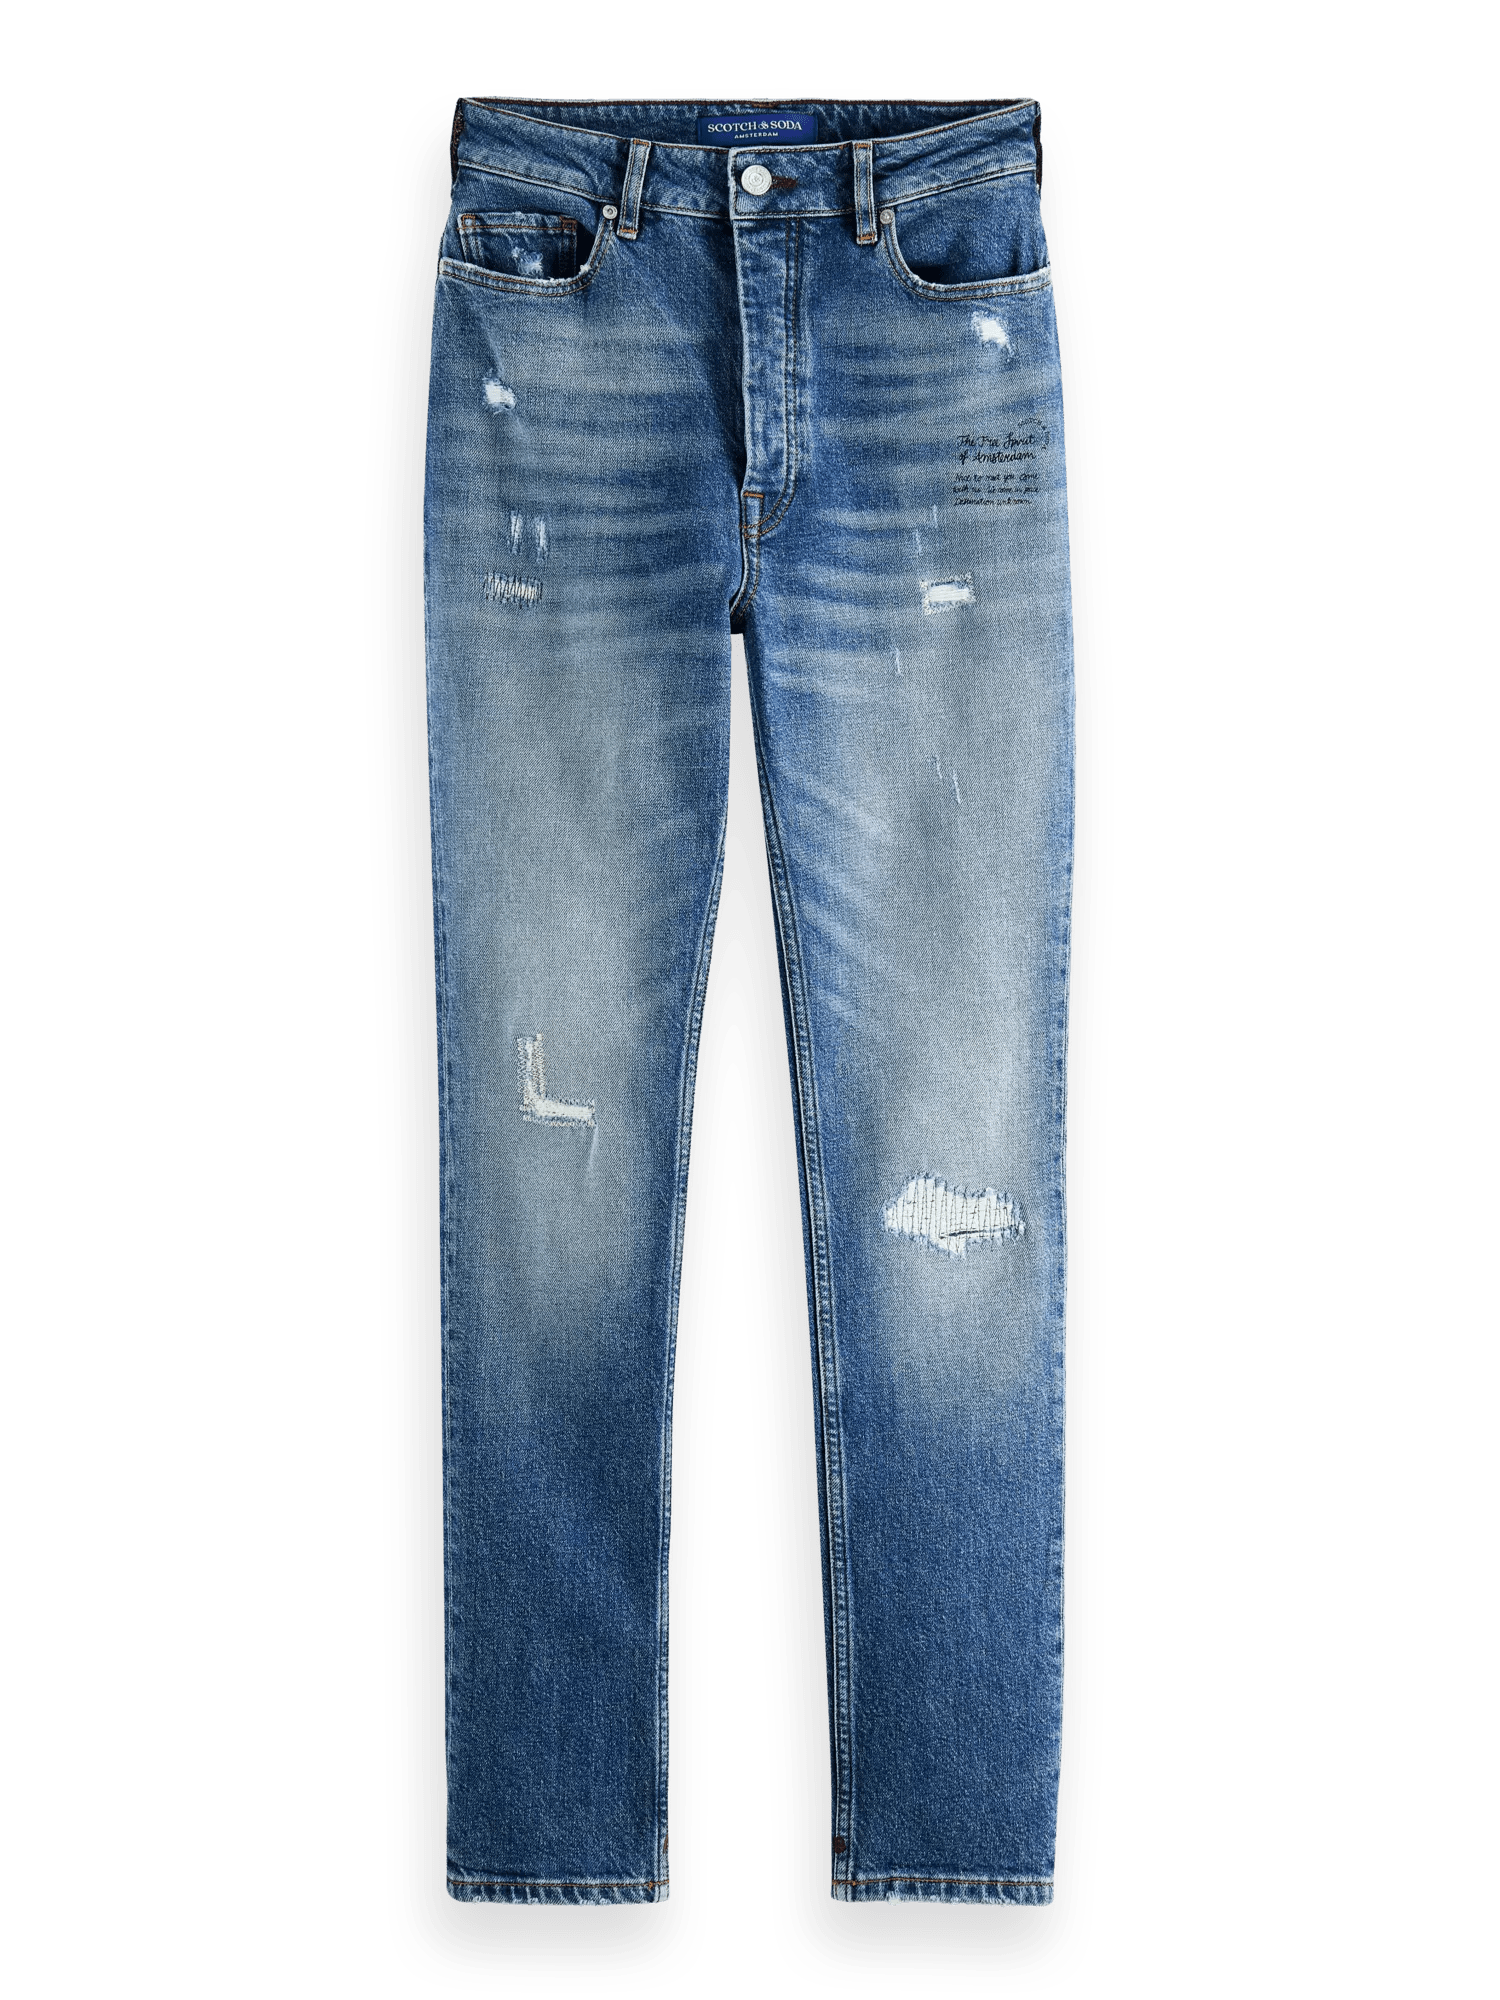 Scotch & Soda The Line high-rise skinny fit organic cotton jeans FNT